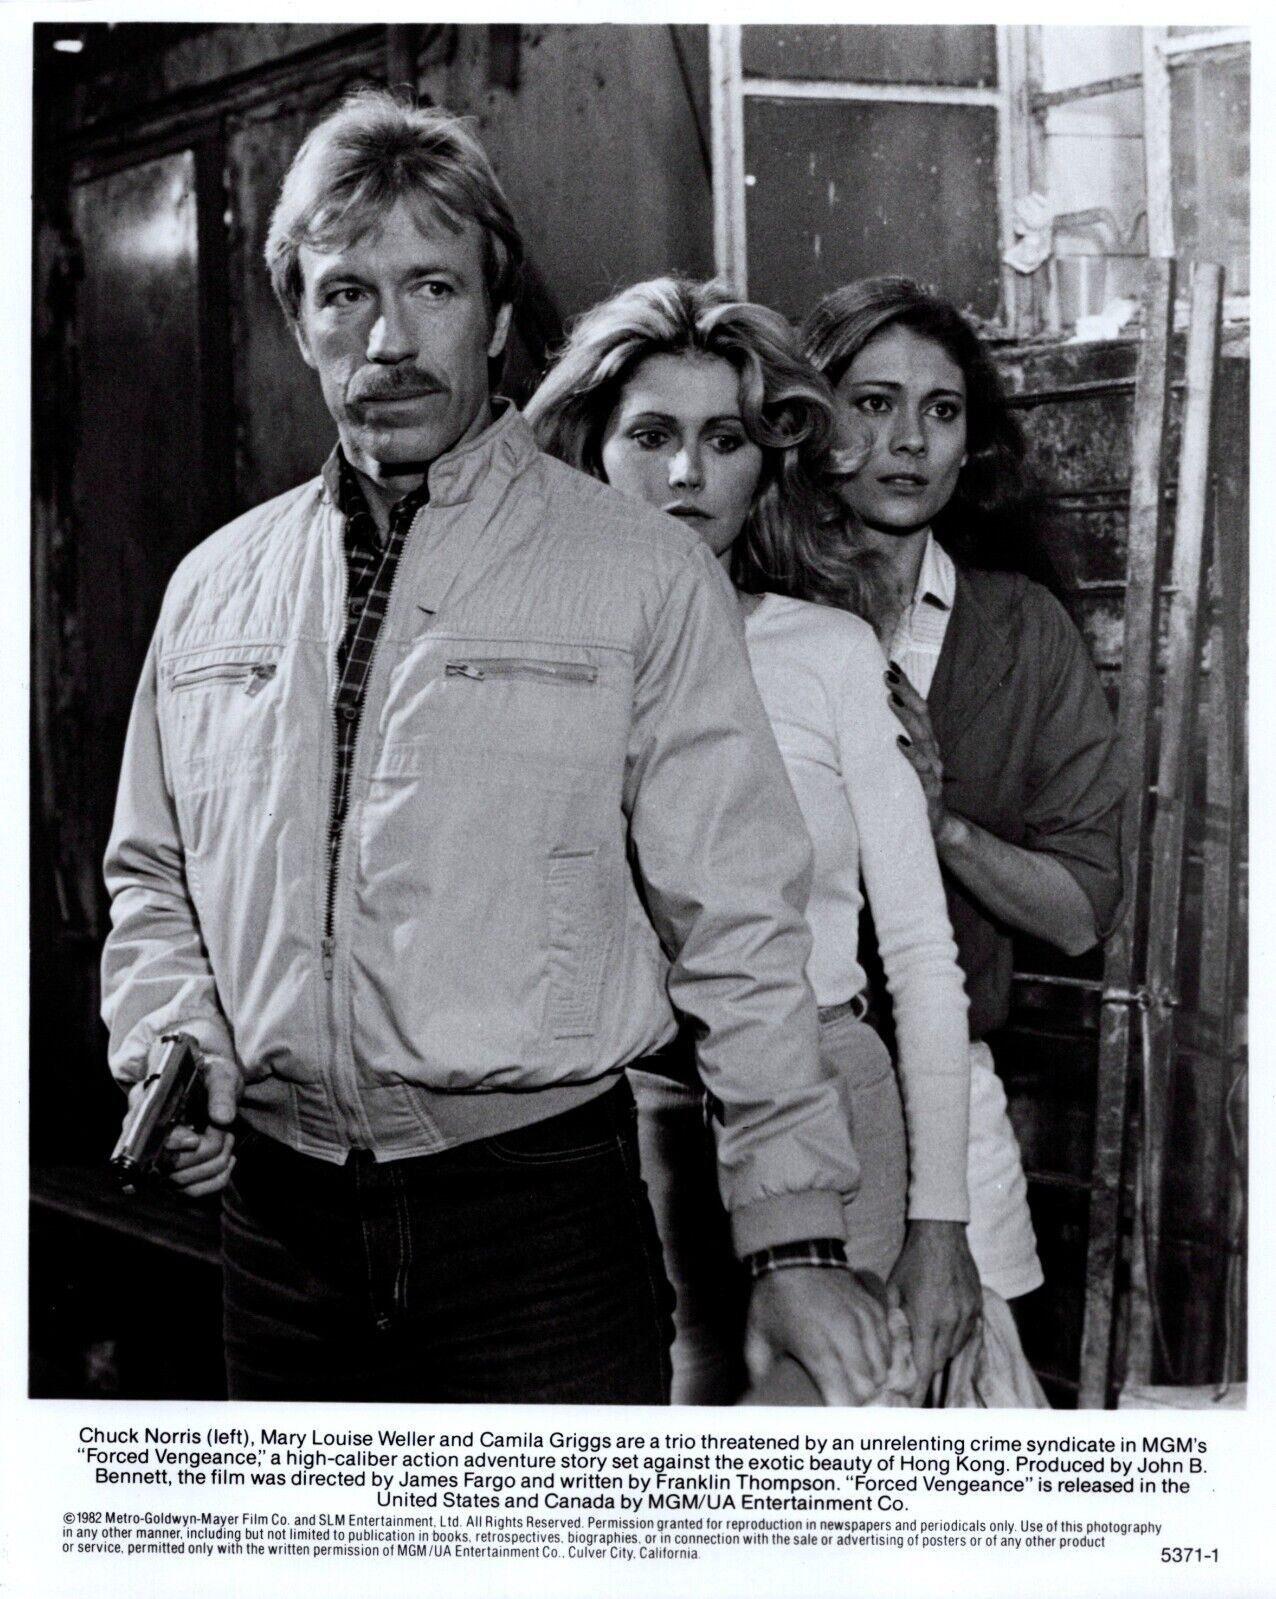 Camila Griggs + Chuck Norris + Mary Louise Weller (1982) 🎬⭐ MGM Photo K 467